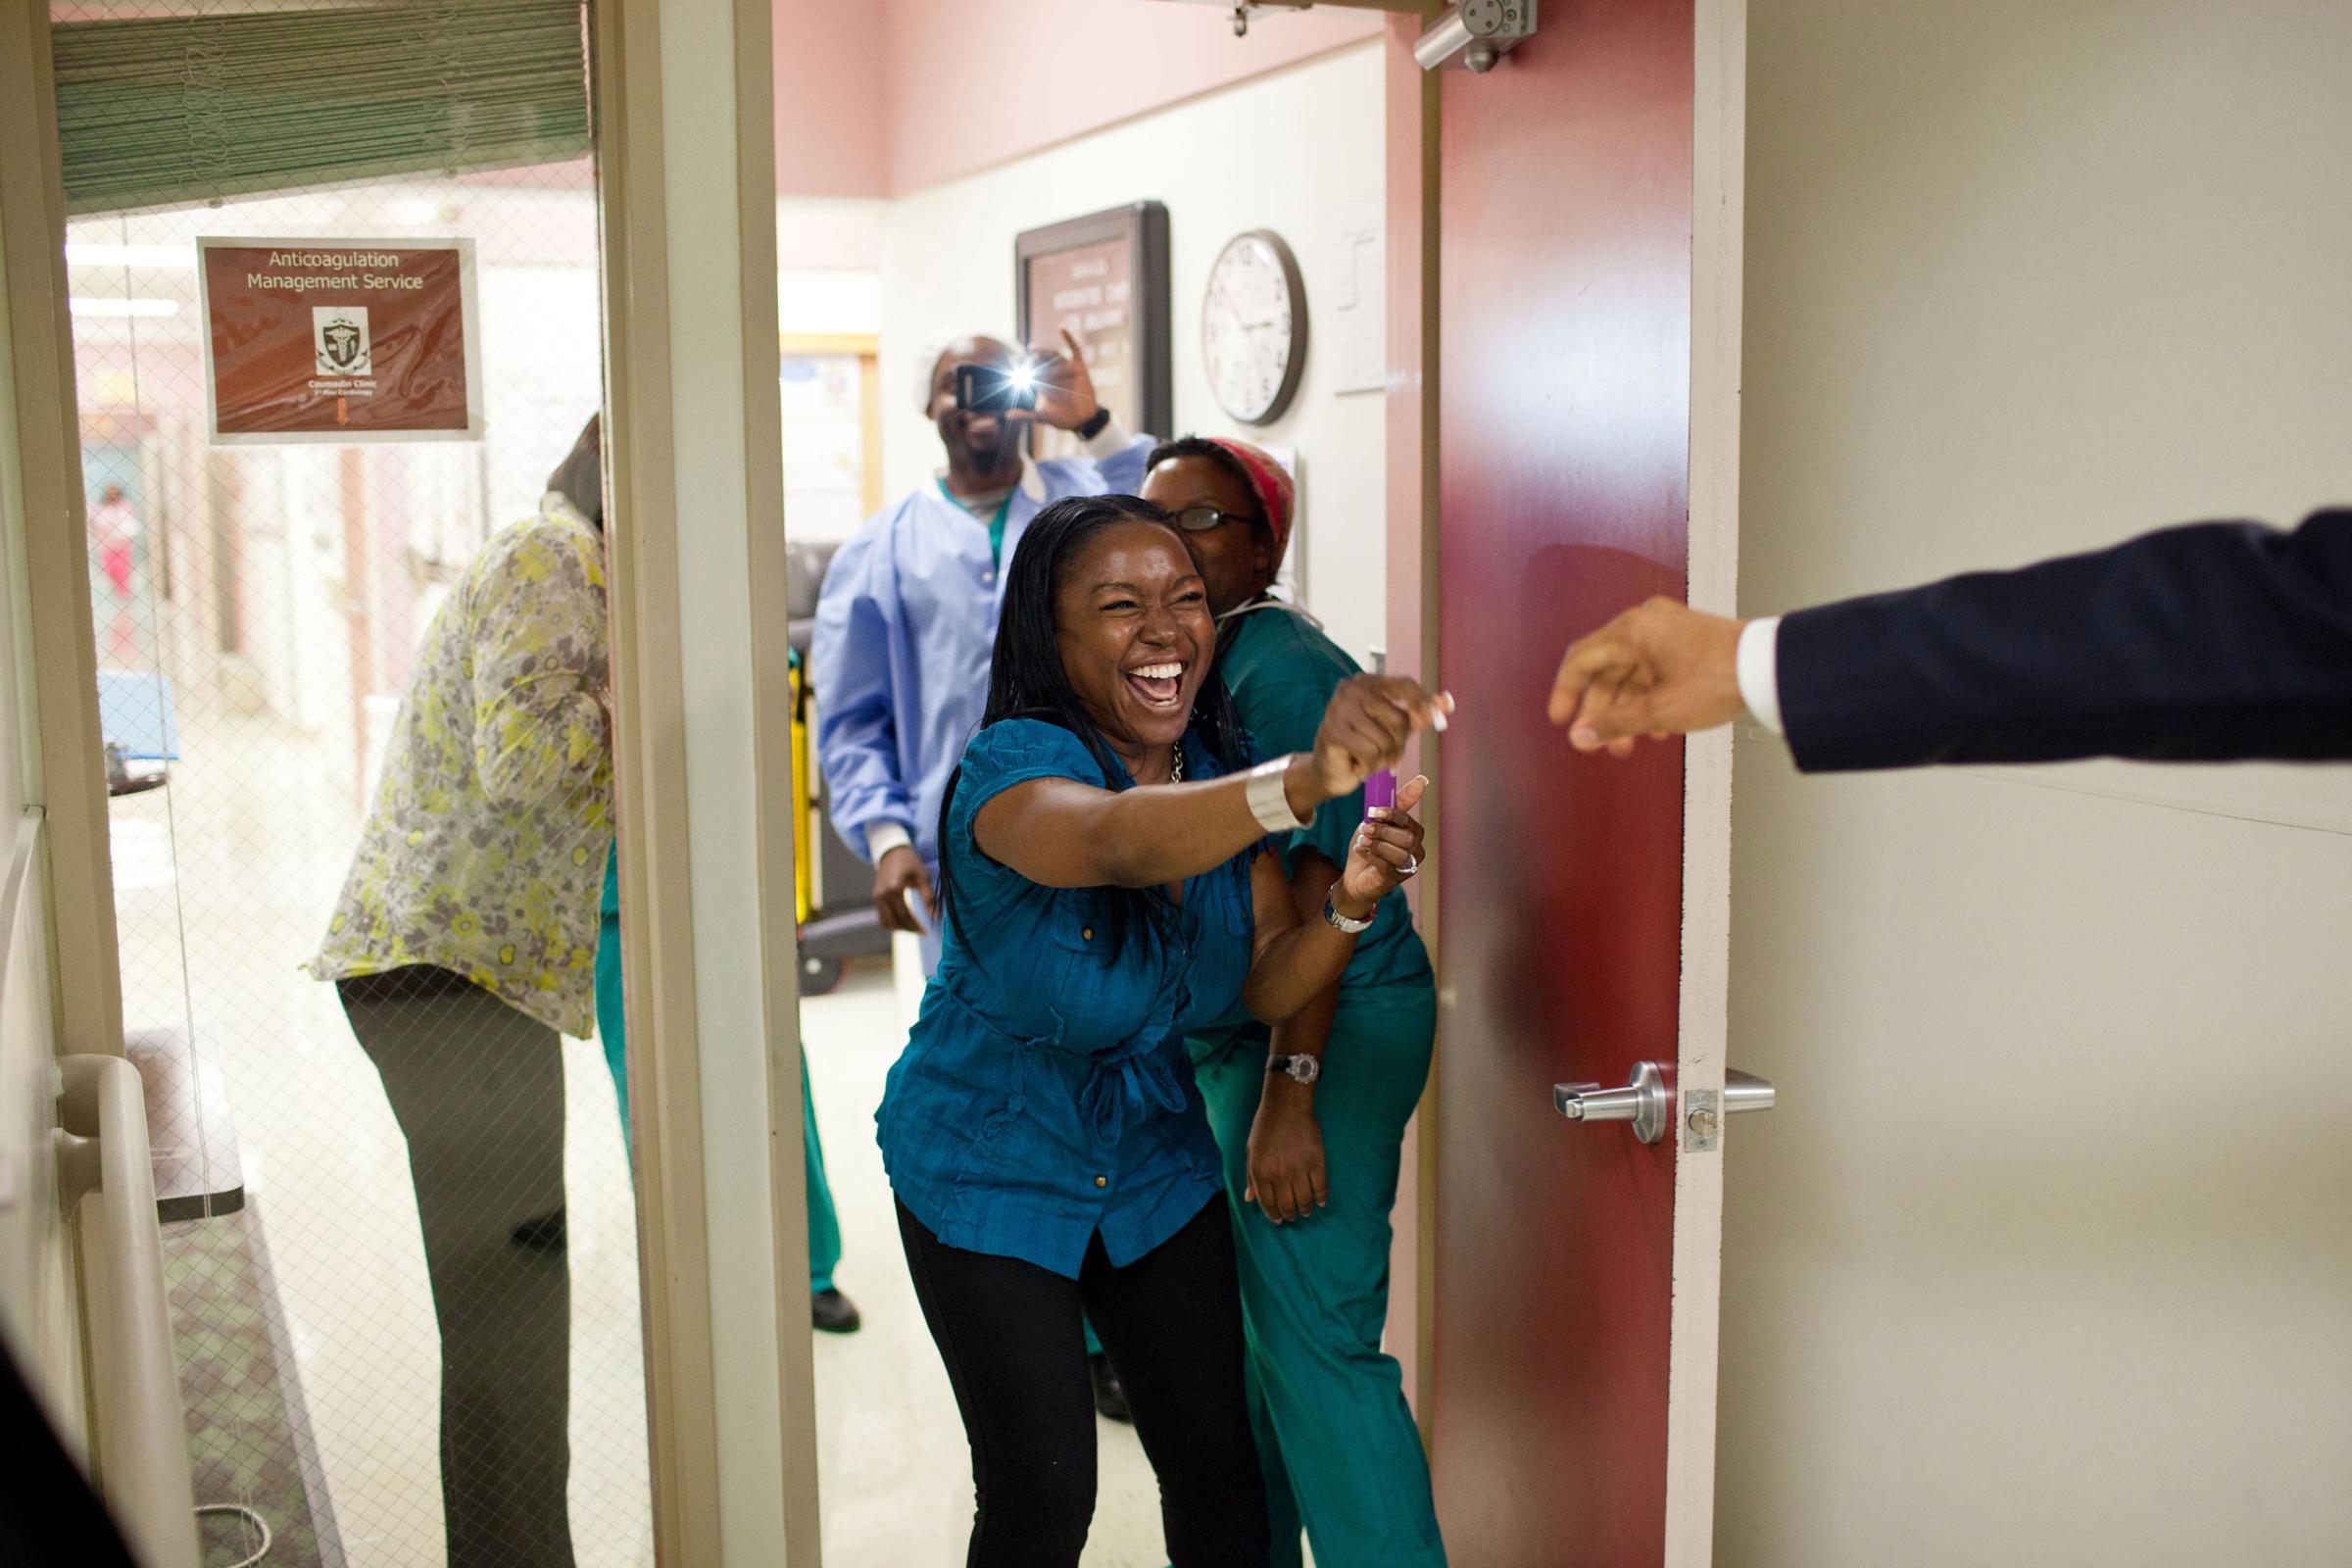 President Barack Obama greets hospital workers while visiting wounded service members at Walter Reed Army Medical Center in Washington, D.C., June 17, 2011.